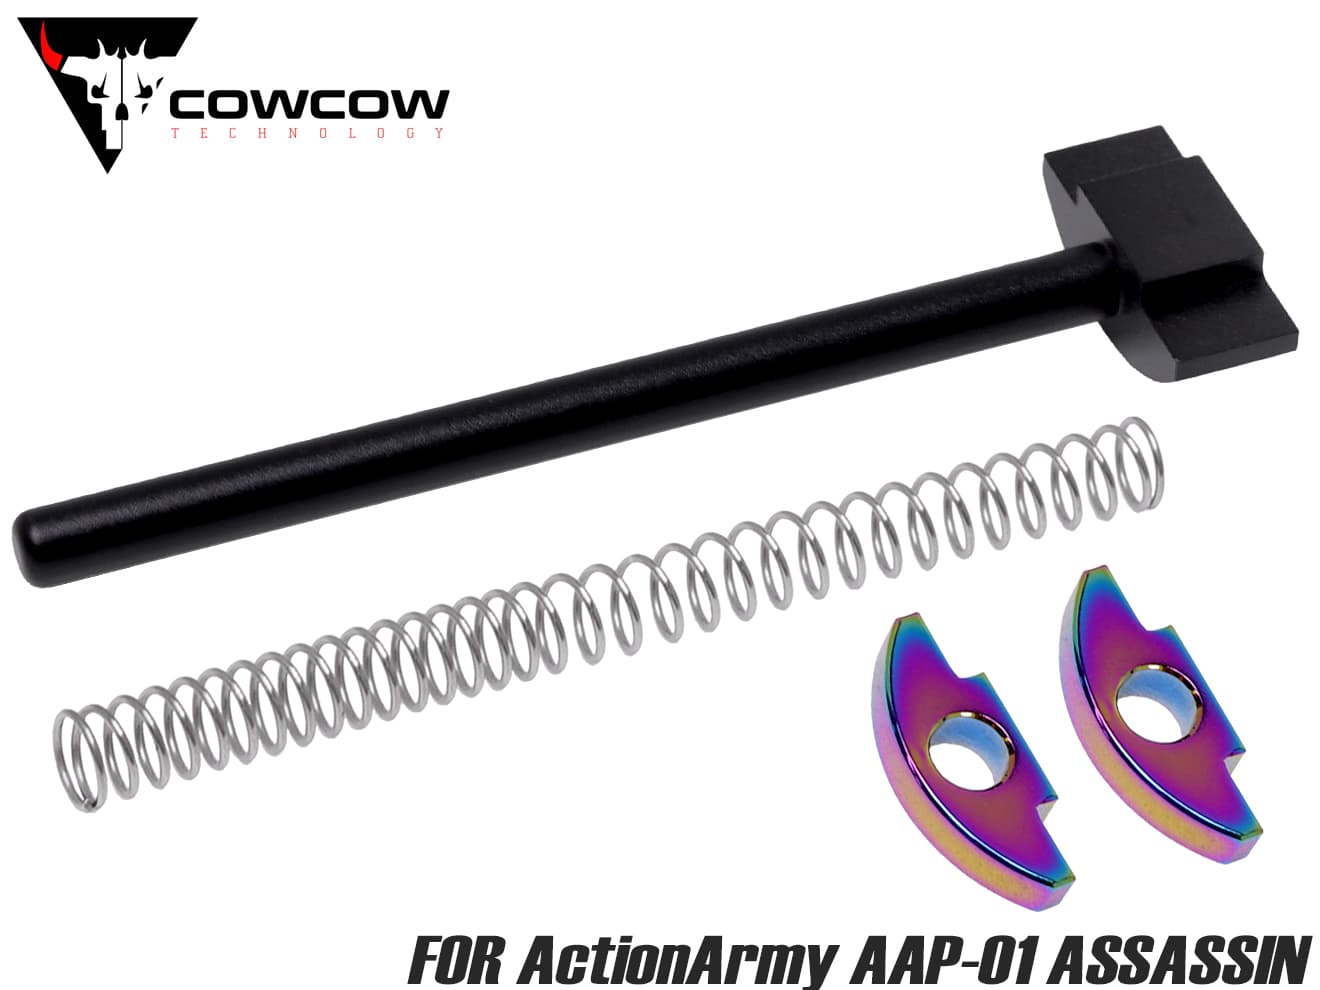 COW-AAP-NZ006 COWCOW TECHNOLOGY A7075 CNC ノズルブロック for